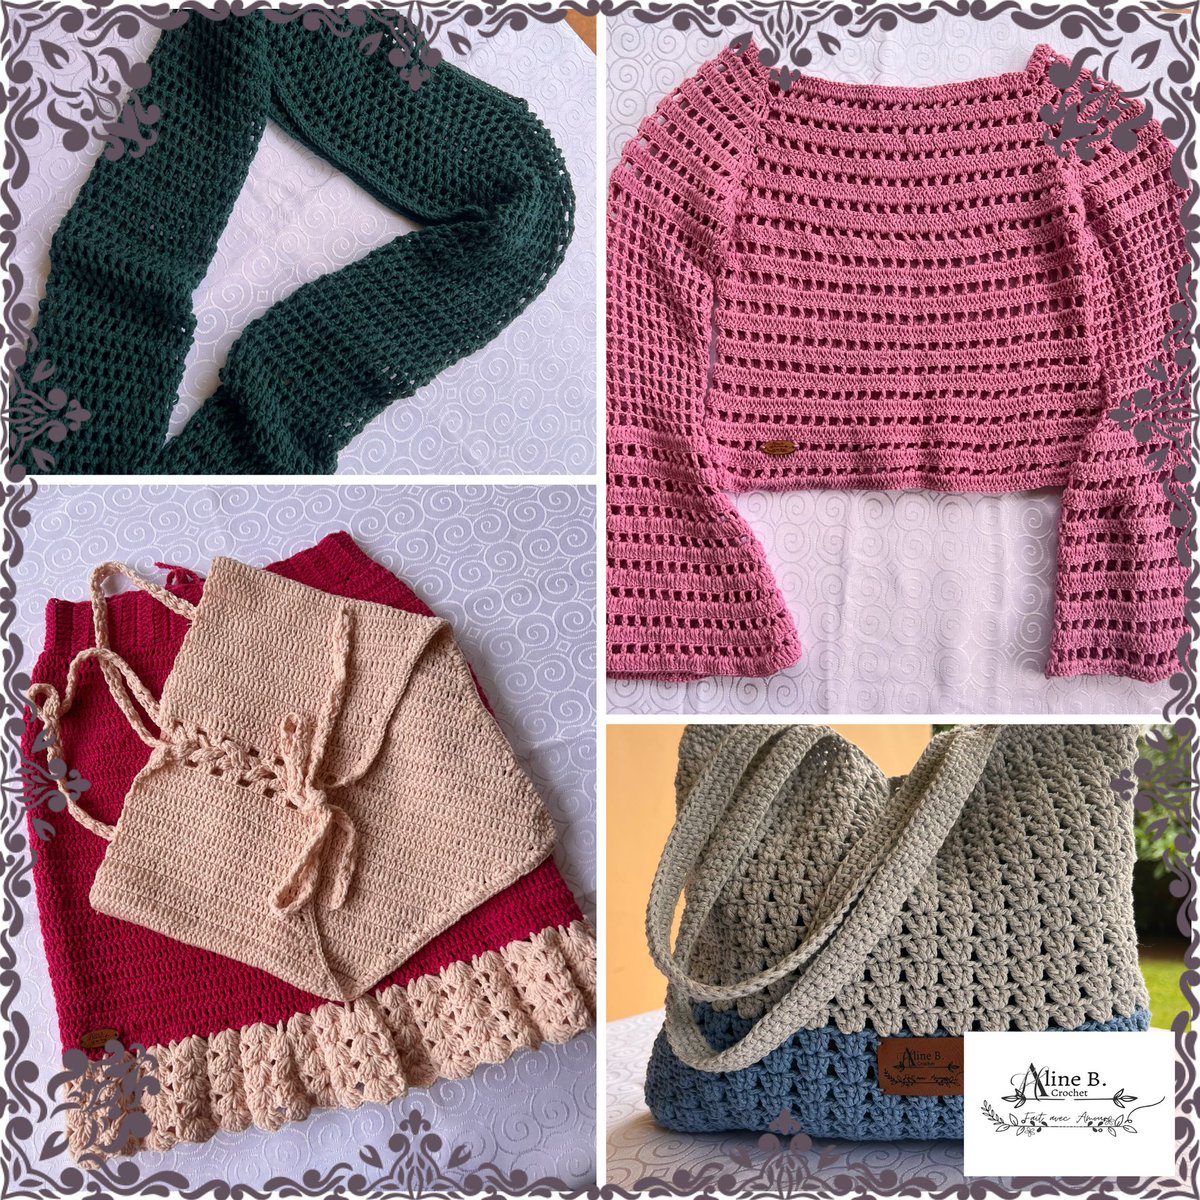 Handcrafted crochet clothes, scarves and bags by aline crochet at the Christmas market at the French School on Lugogo bypass on Saturday 25th of November (car park entrance by Legends Bar in Lugogo).#marchedenoelakampala #christmasgifts #christmasideas #christmasmarket #kampala